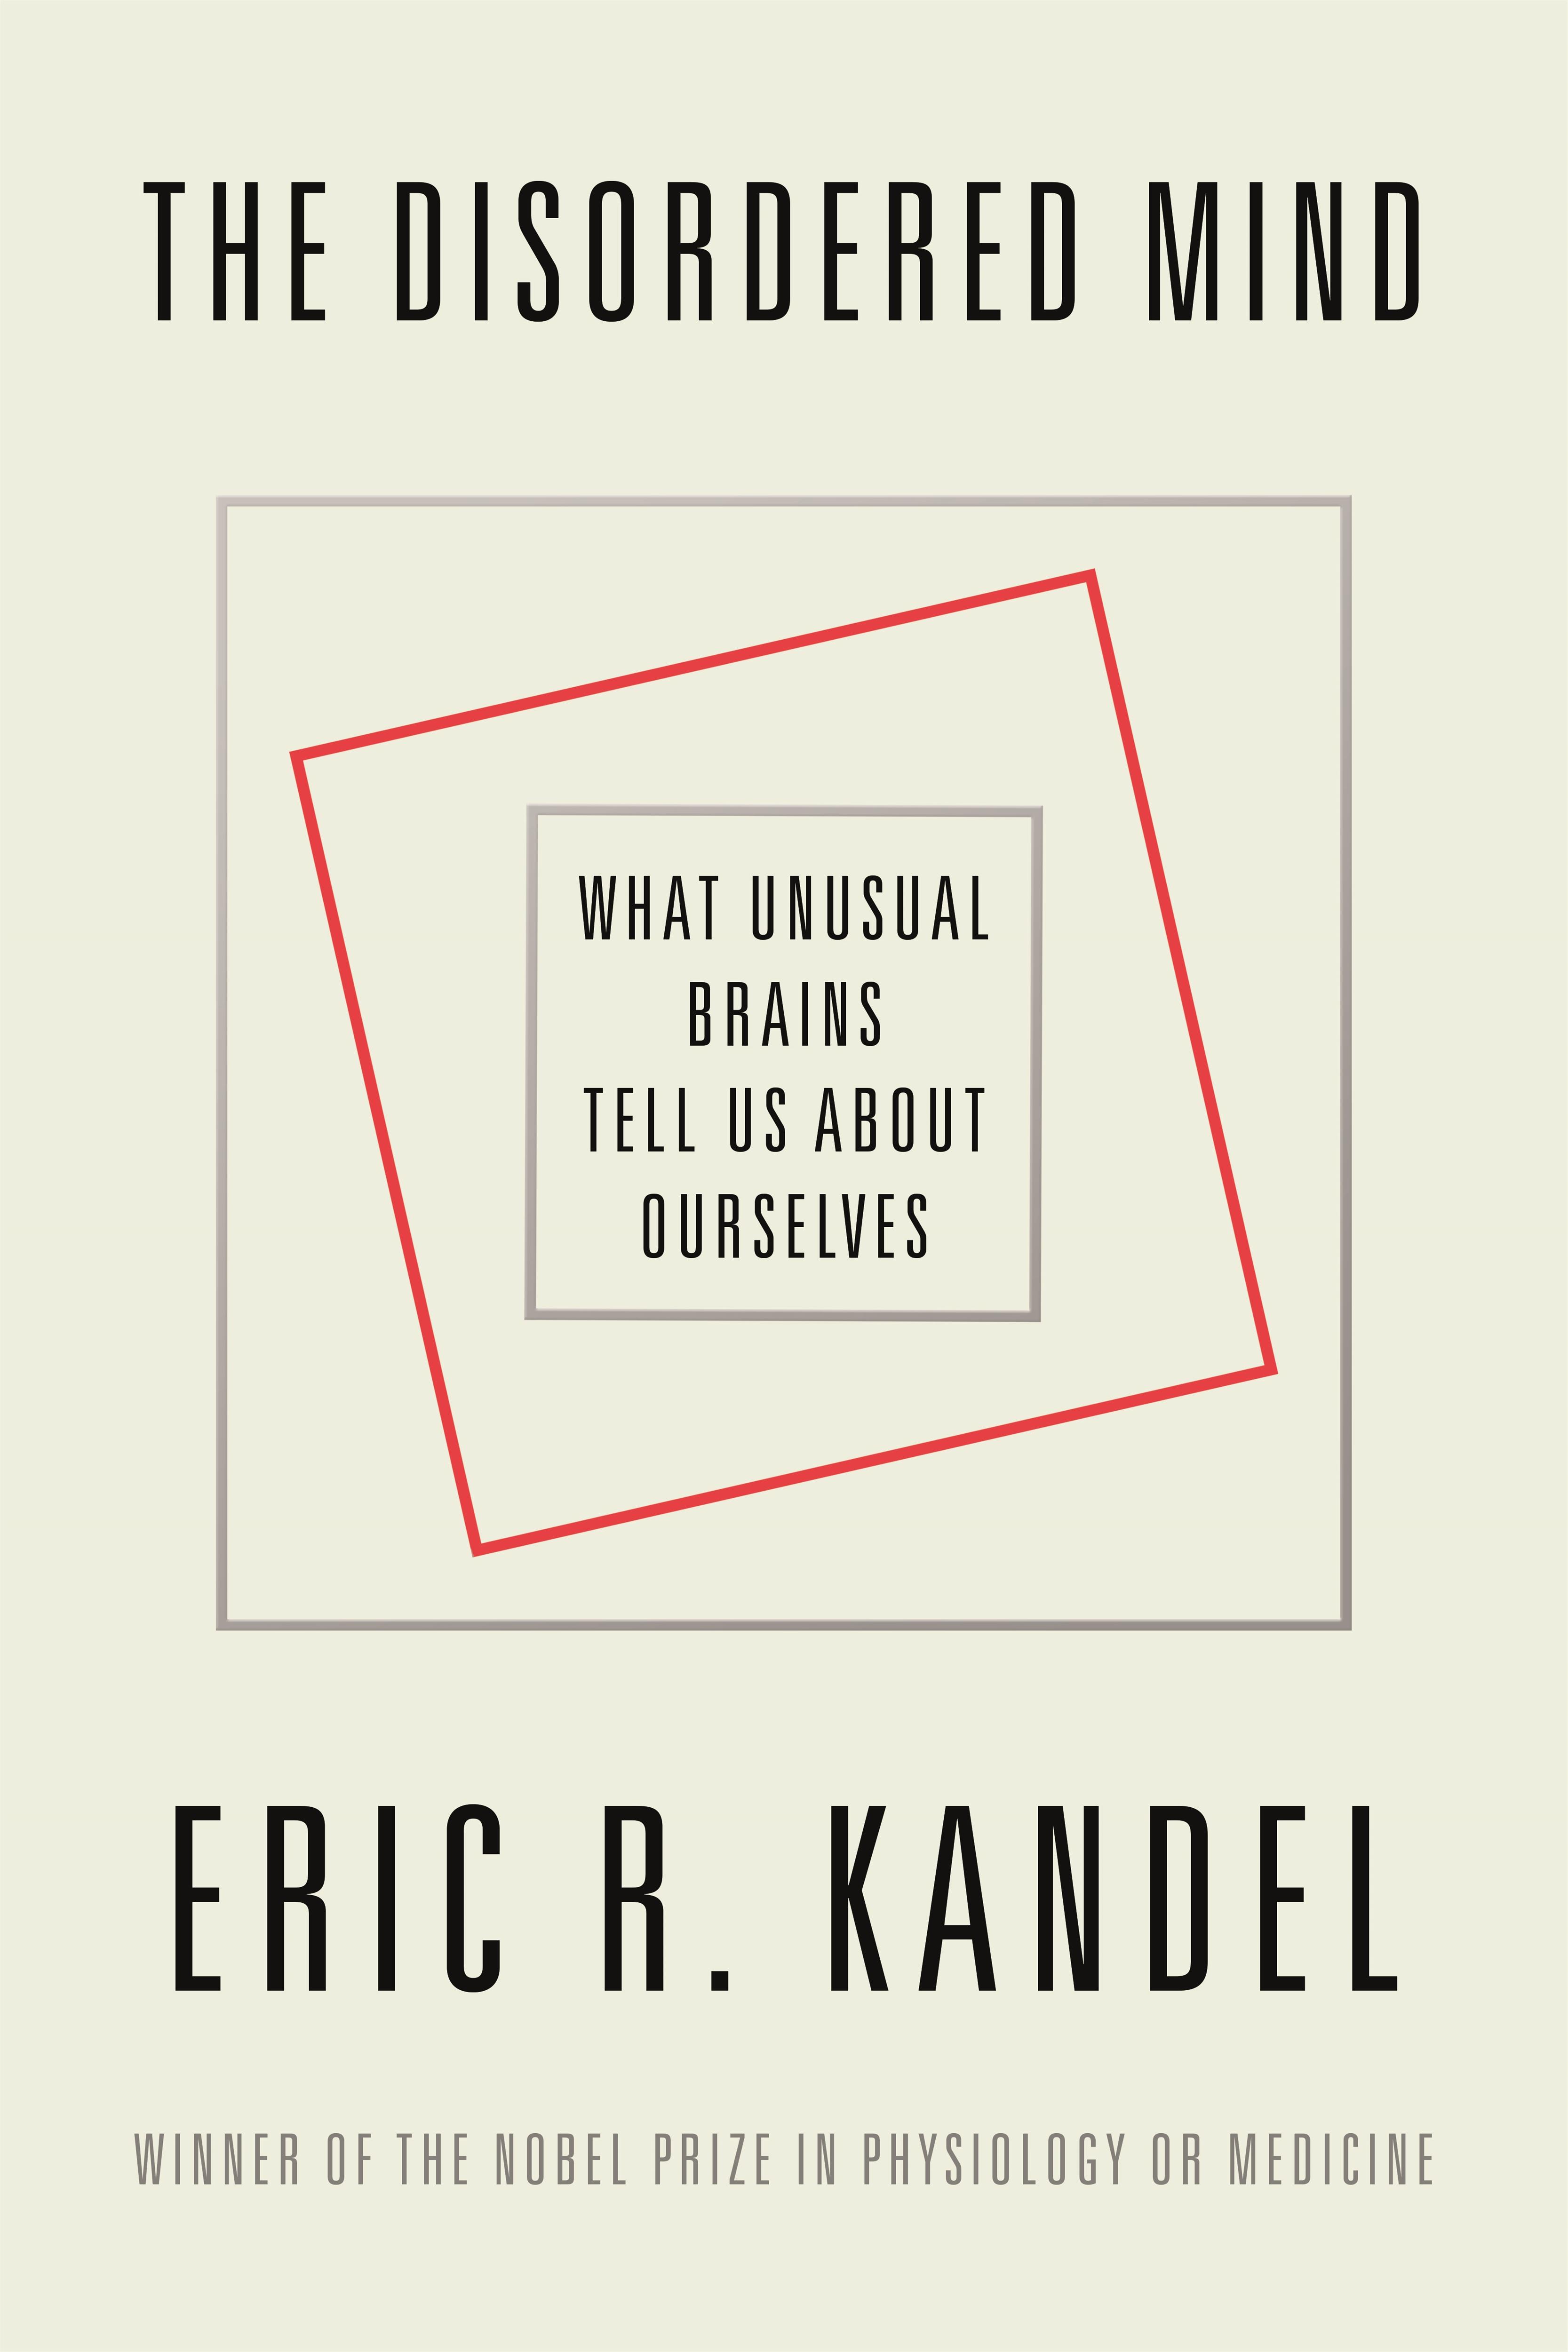 The Disordered Mind: What Unusual Brains Tell Us about Ourselves / Eric R. Kandel / Buch / Englisch / 2018 / FARRAR STRAUSS & GIROUX / EAN 9780374287863 - Kandel, Eric R.